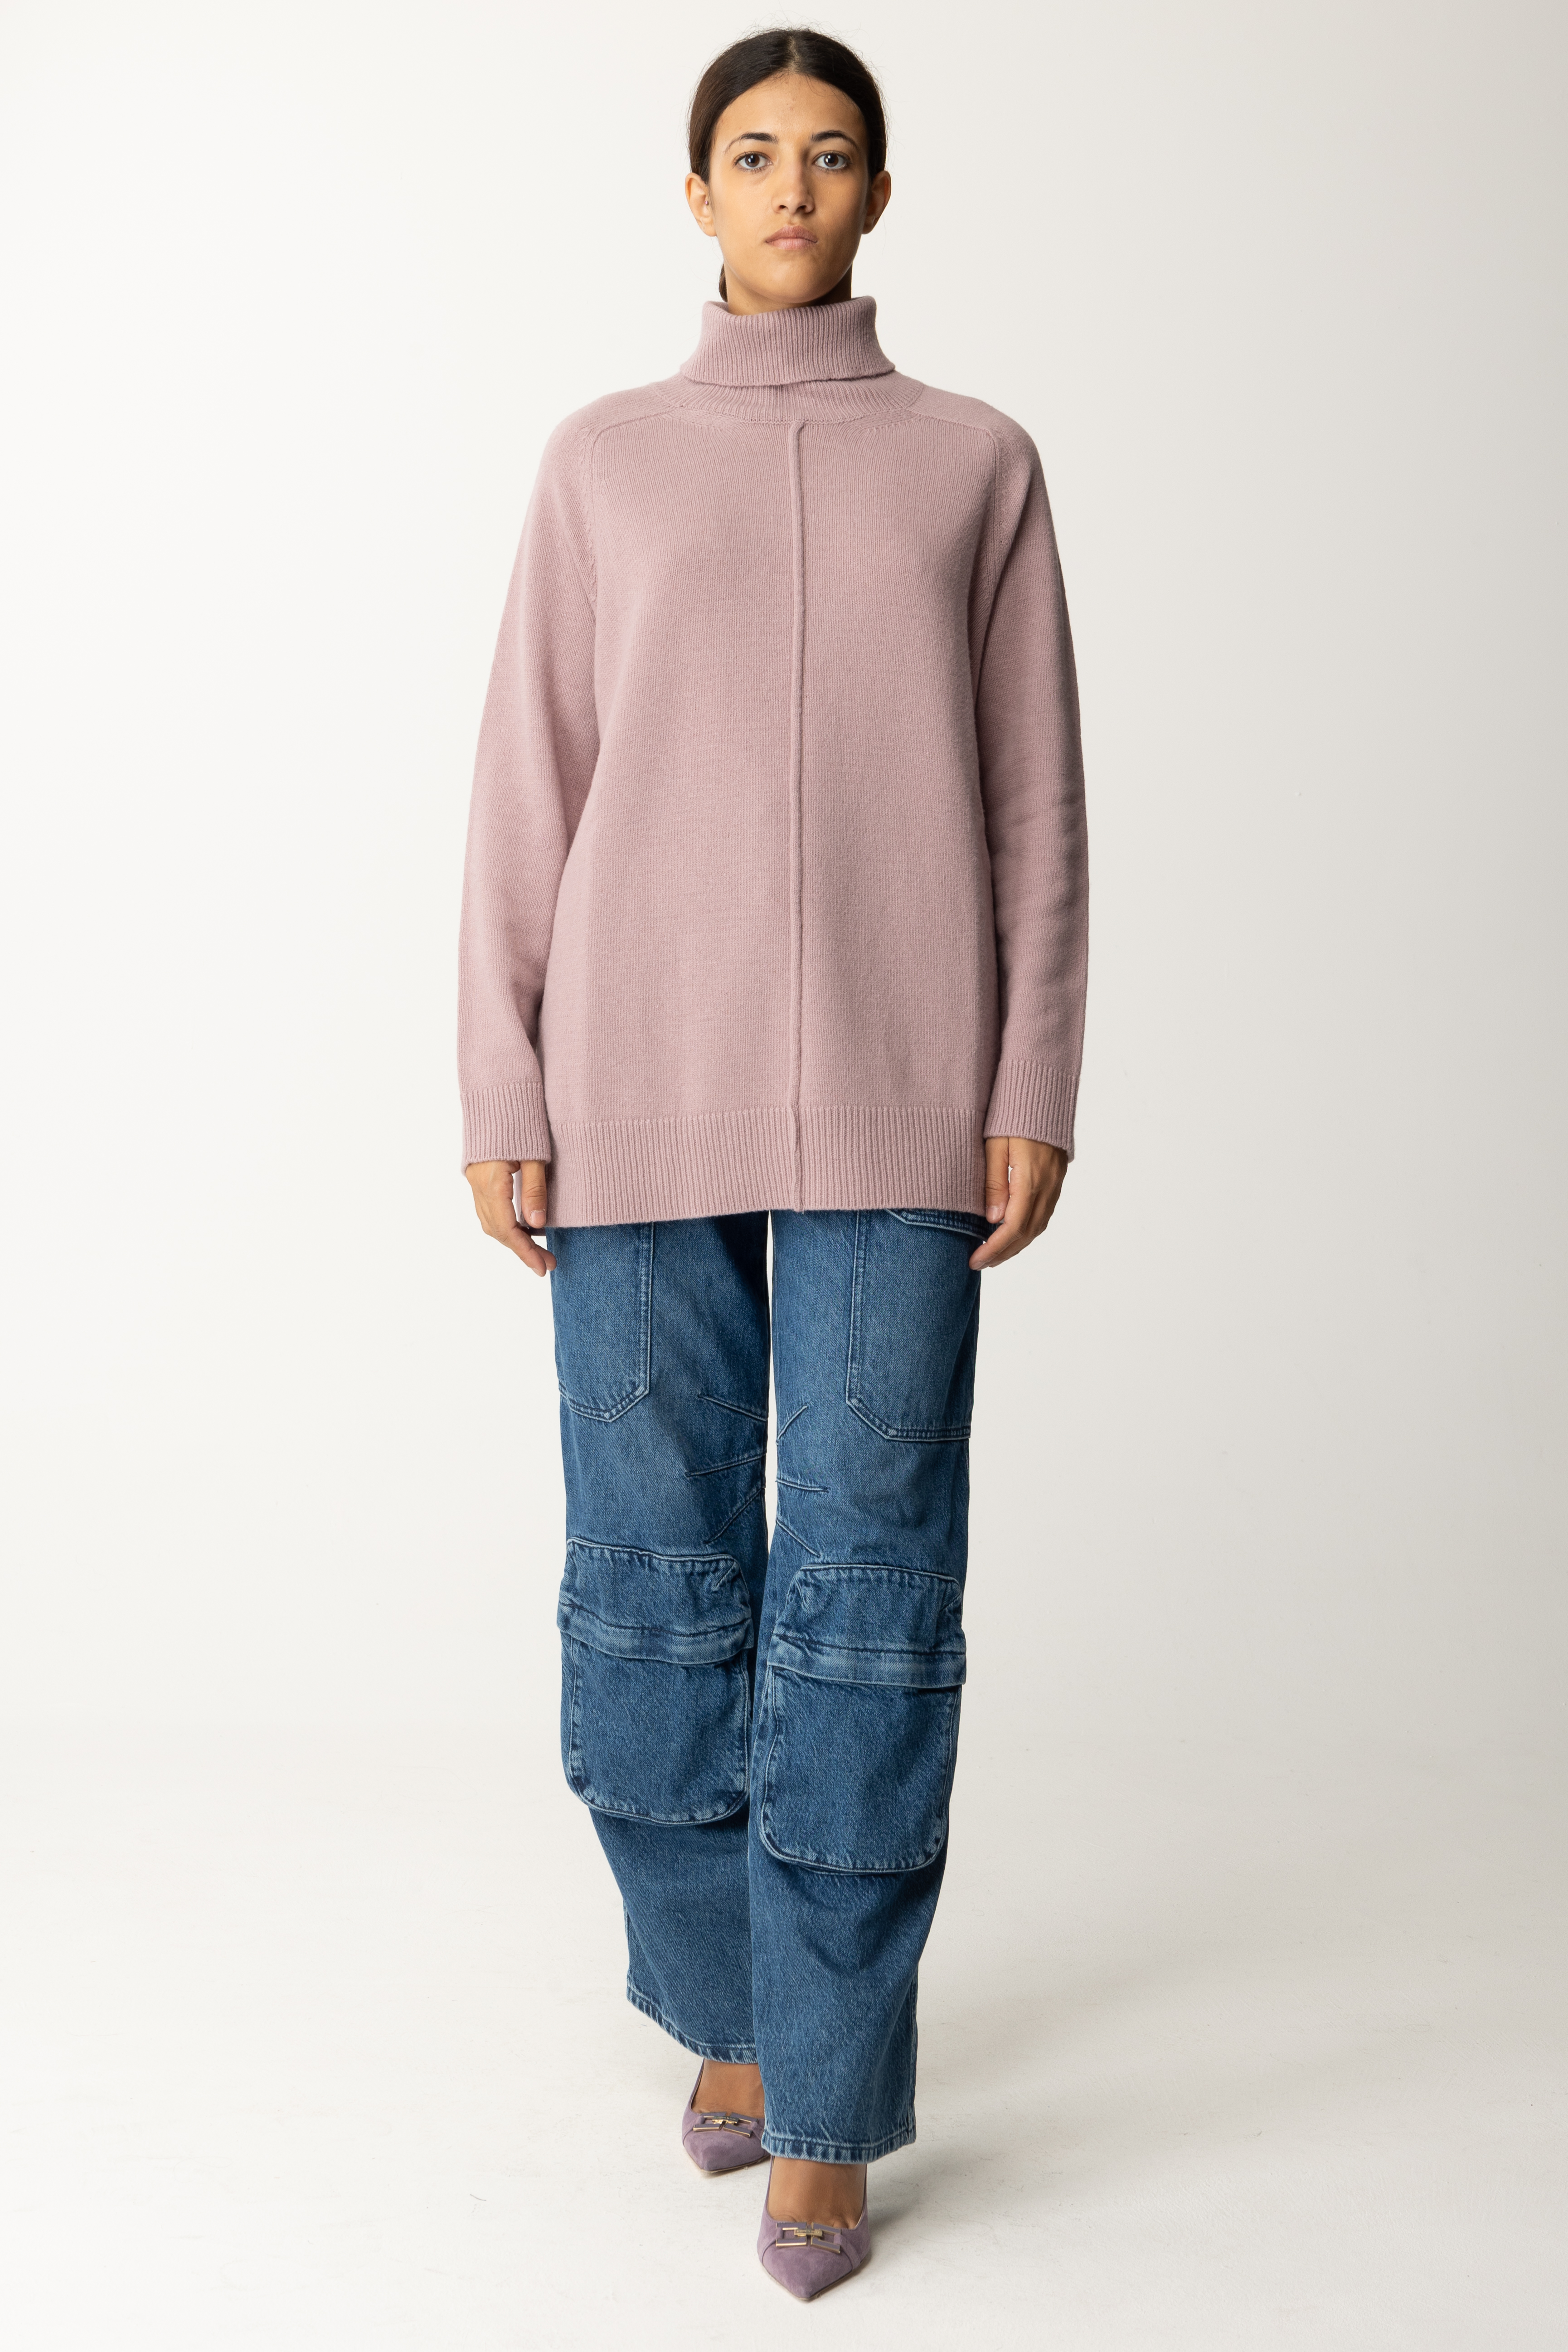 Preview: Semicouture Wool turtleneck with slit on the back BERRY